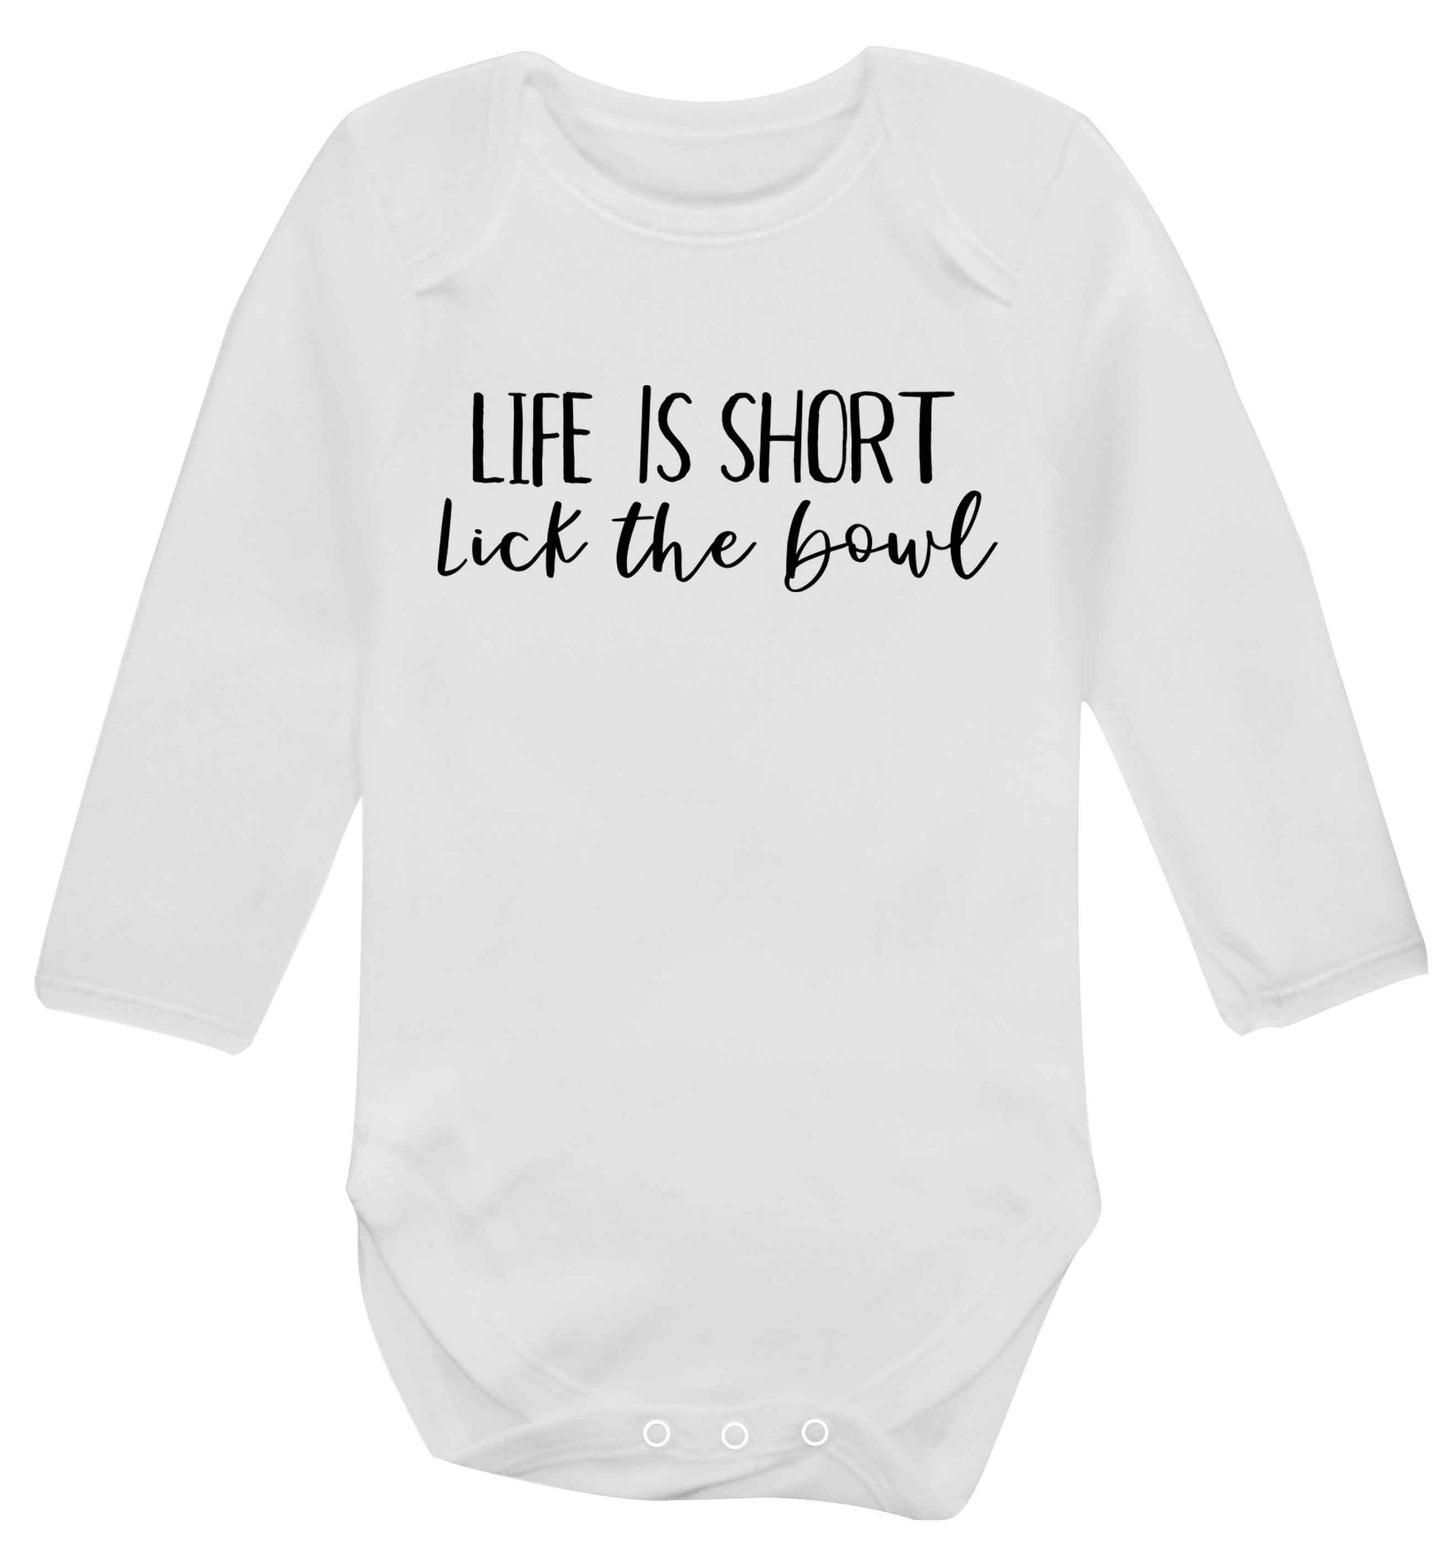 Life is short lick the bowl Baby Vest long sleeved white 6-12 months